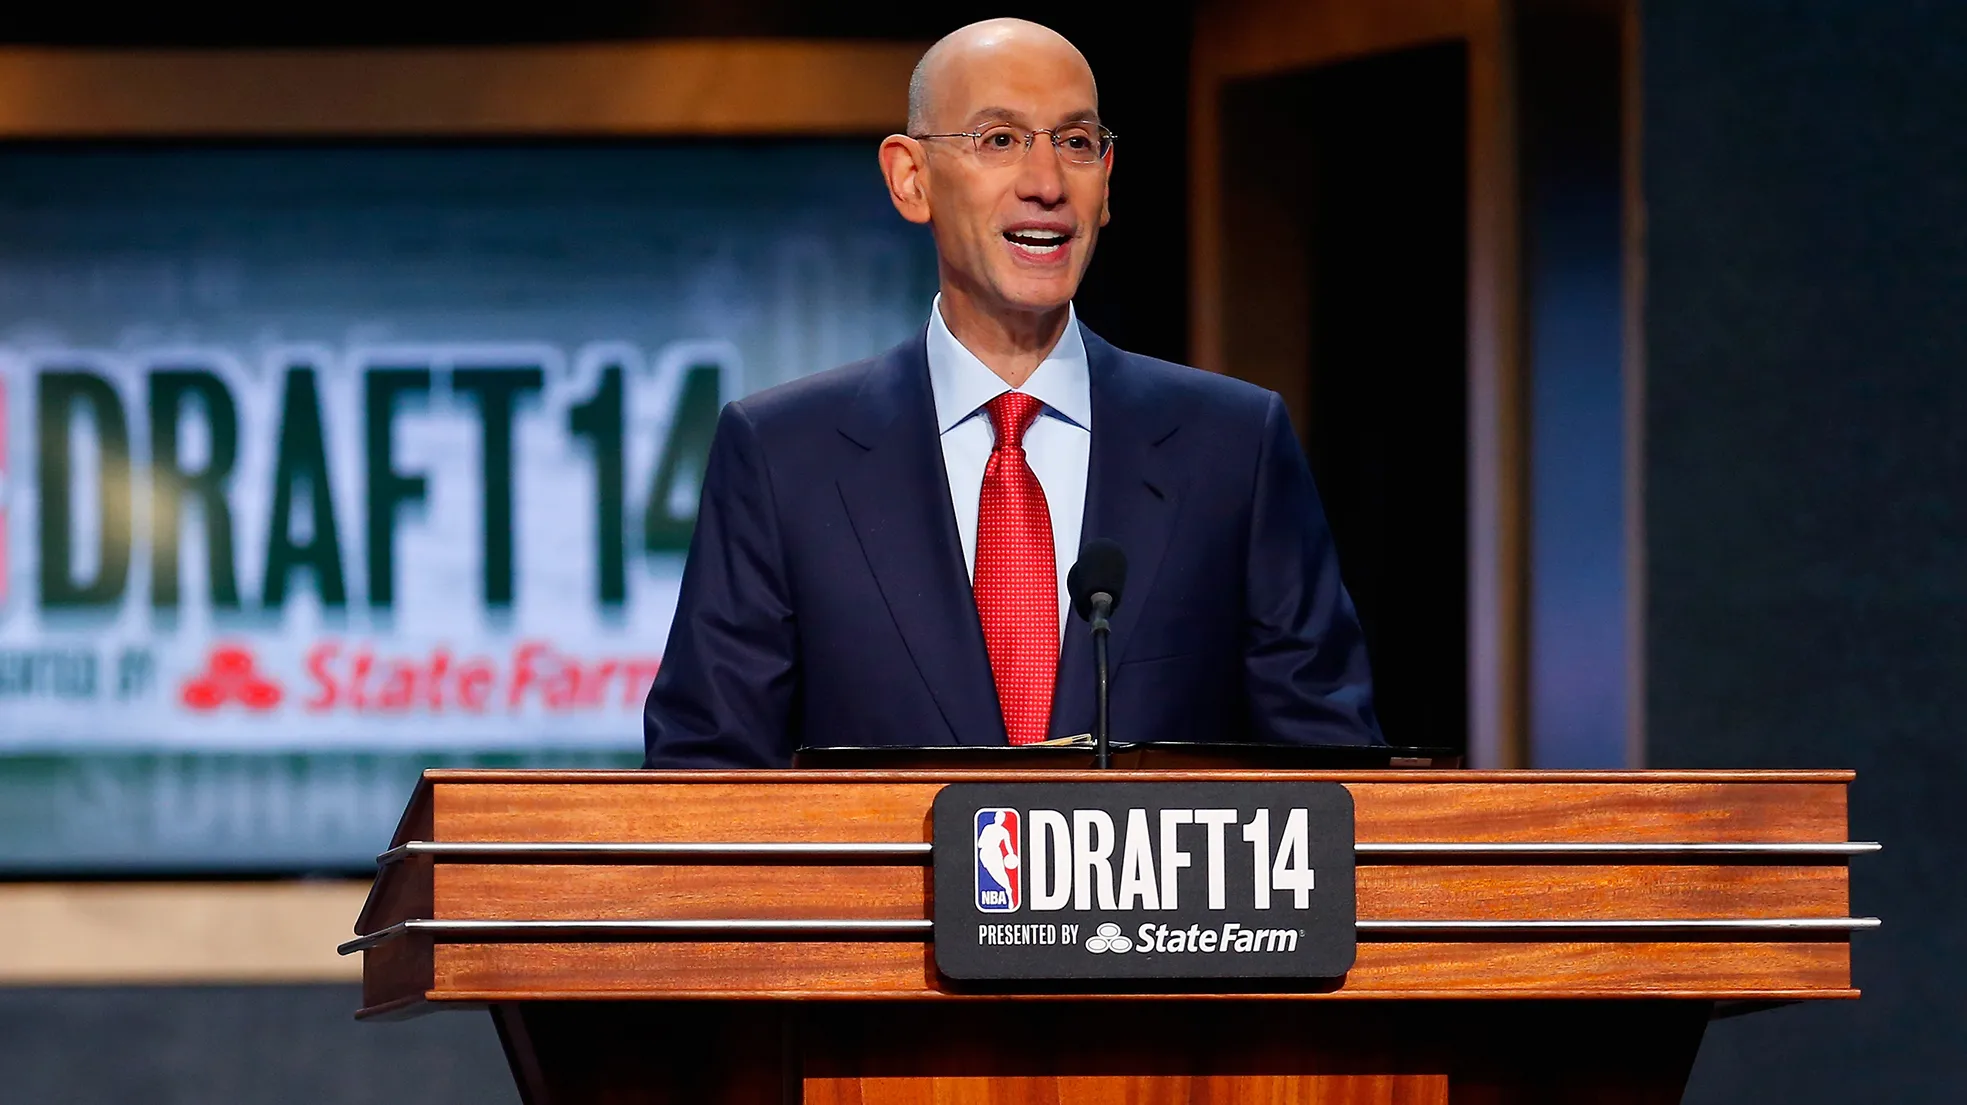 NBA Draft 2015: TV schedule, coverage and how to watch online